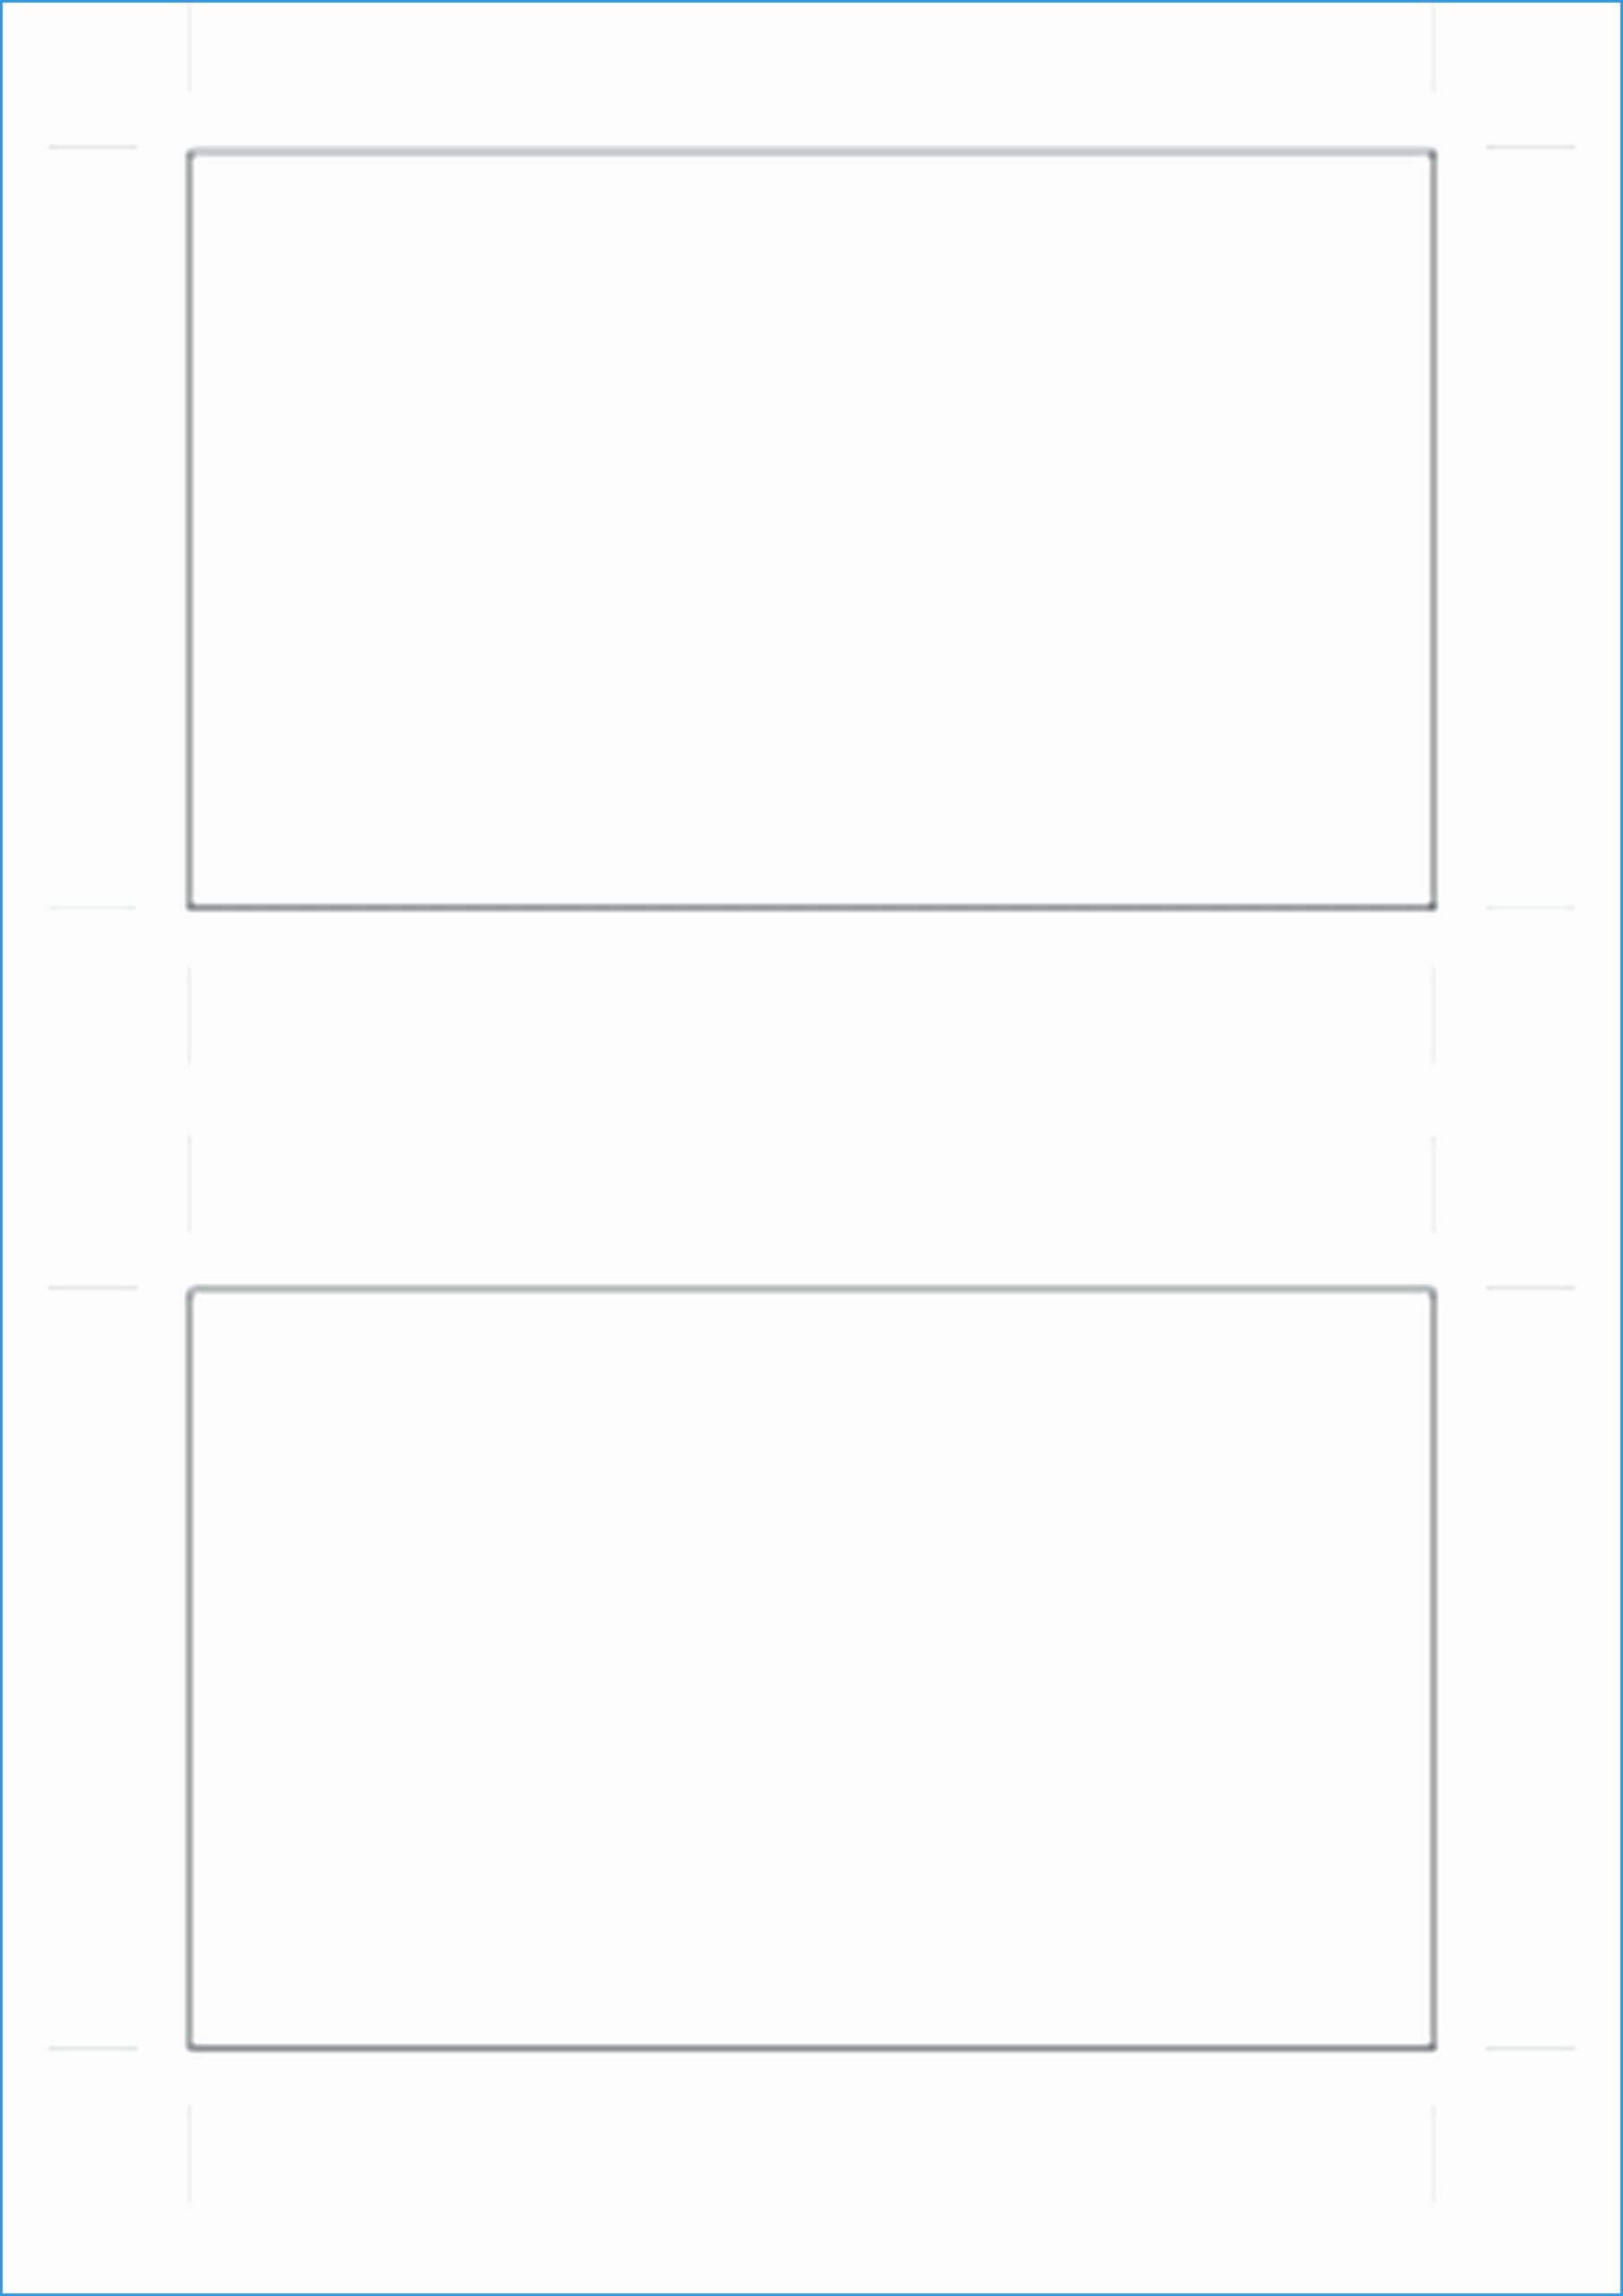 011 Template Ideas Blank Business Card Free Printable Pertaining To Free Business Cards Templates For Word